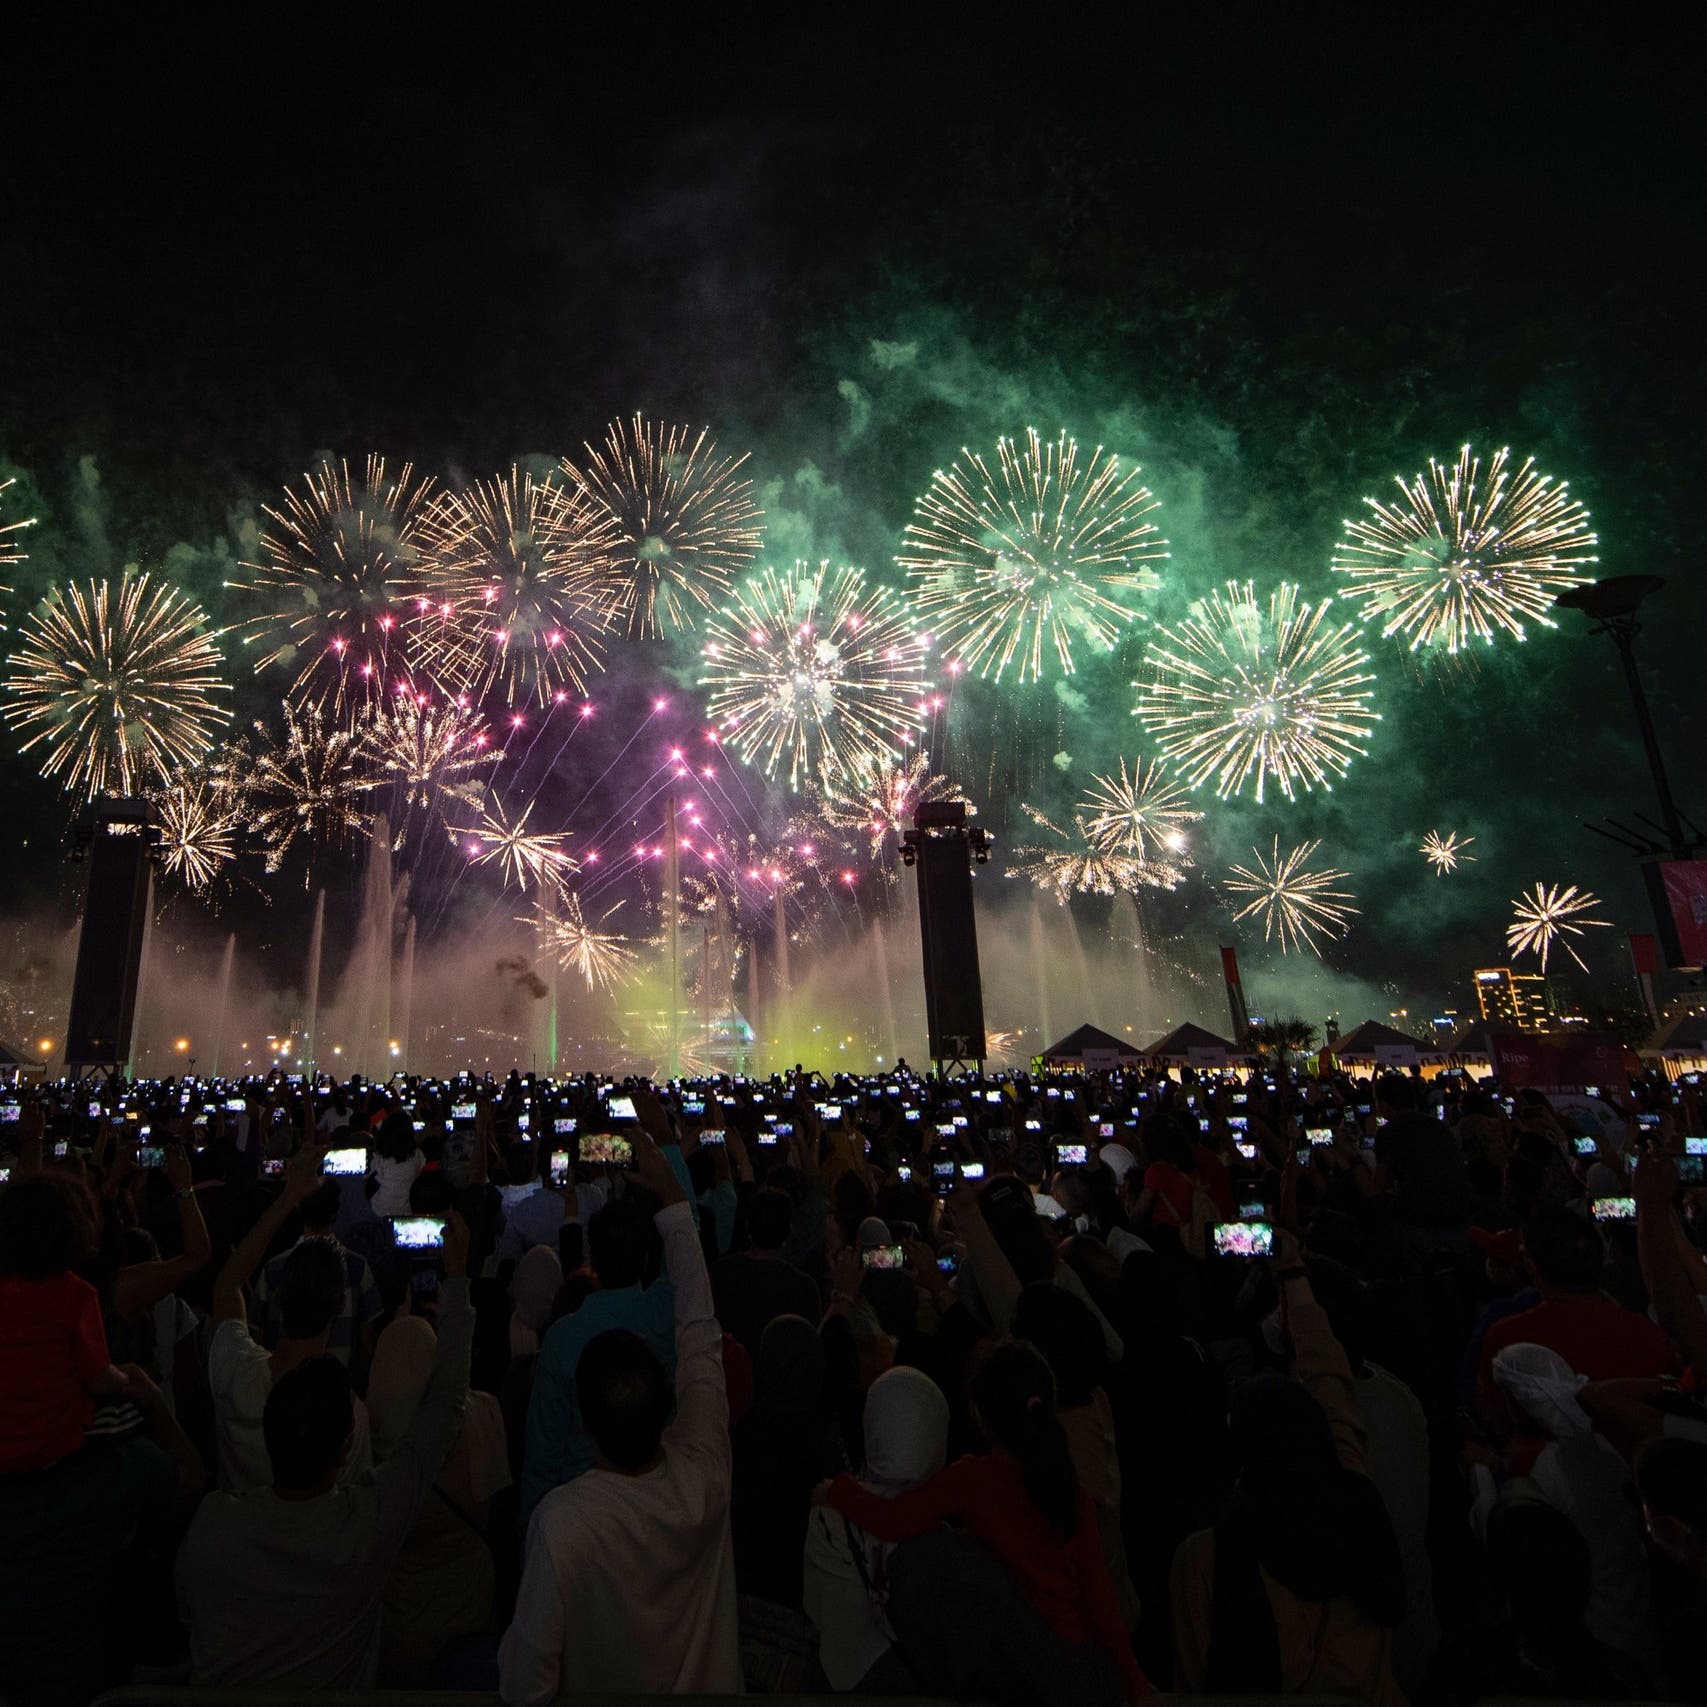 UAE National Day 2022: Where to watch fireworks in Dubai this Friday